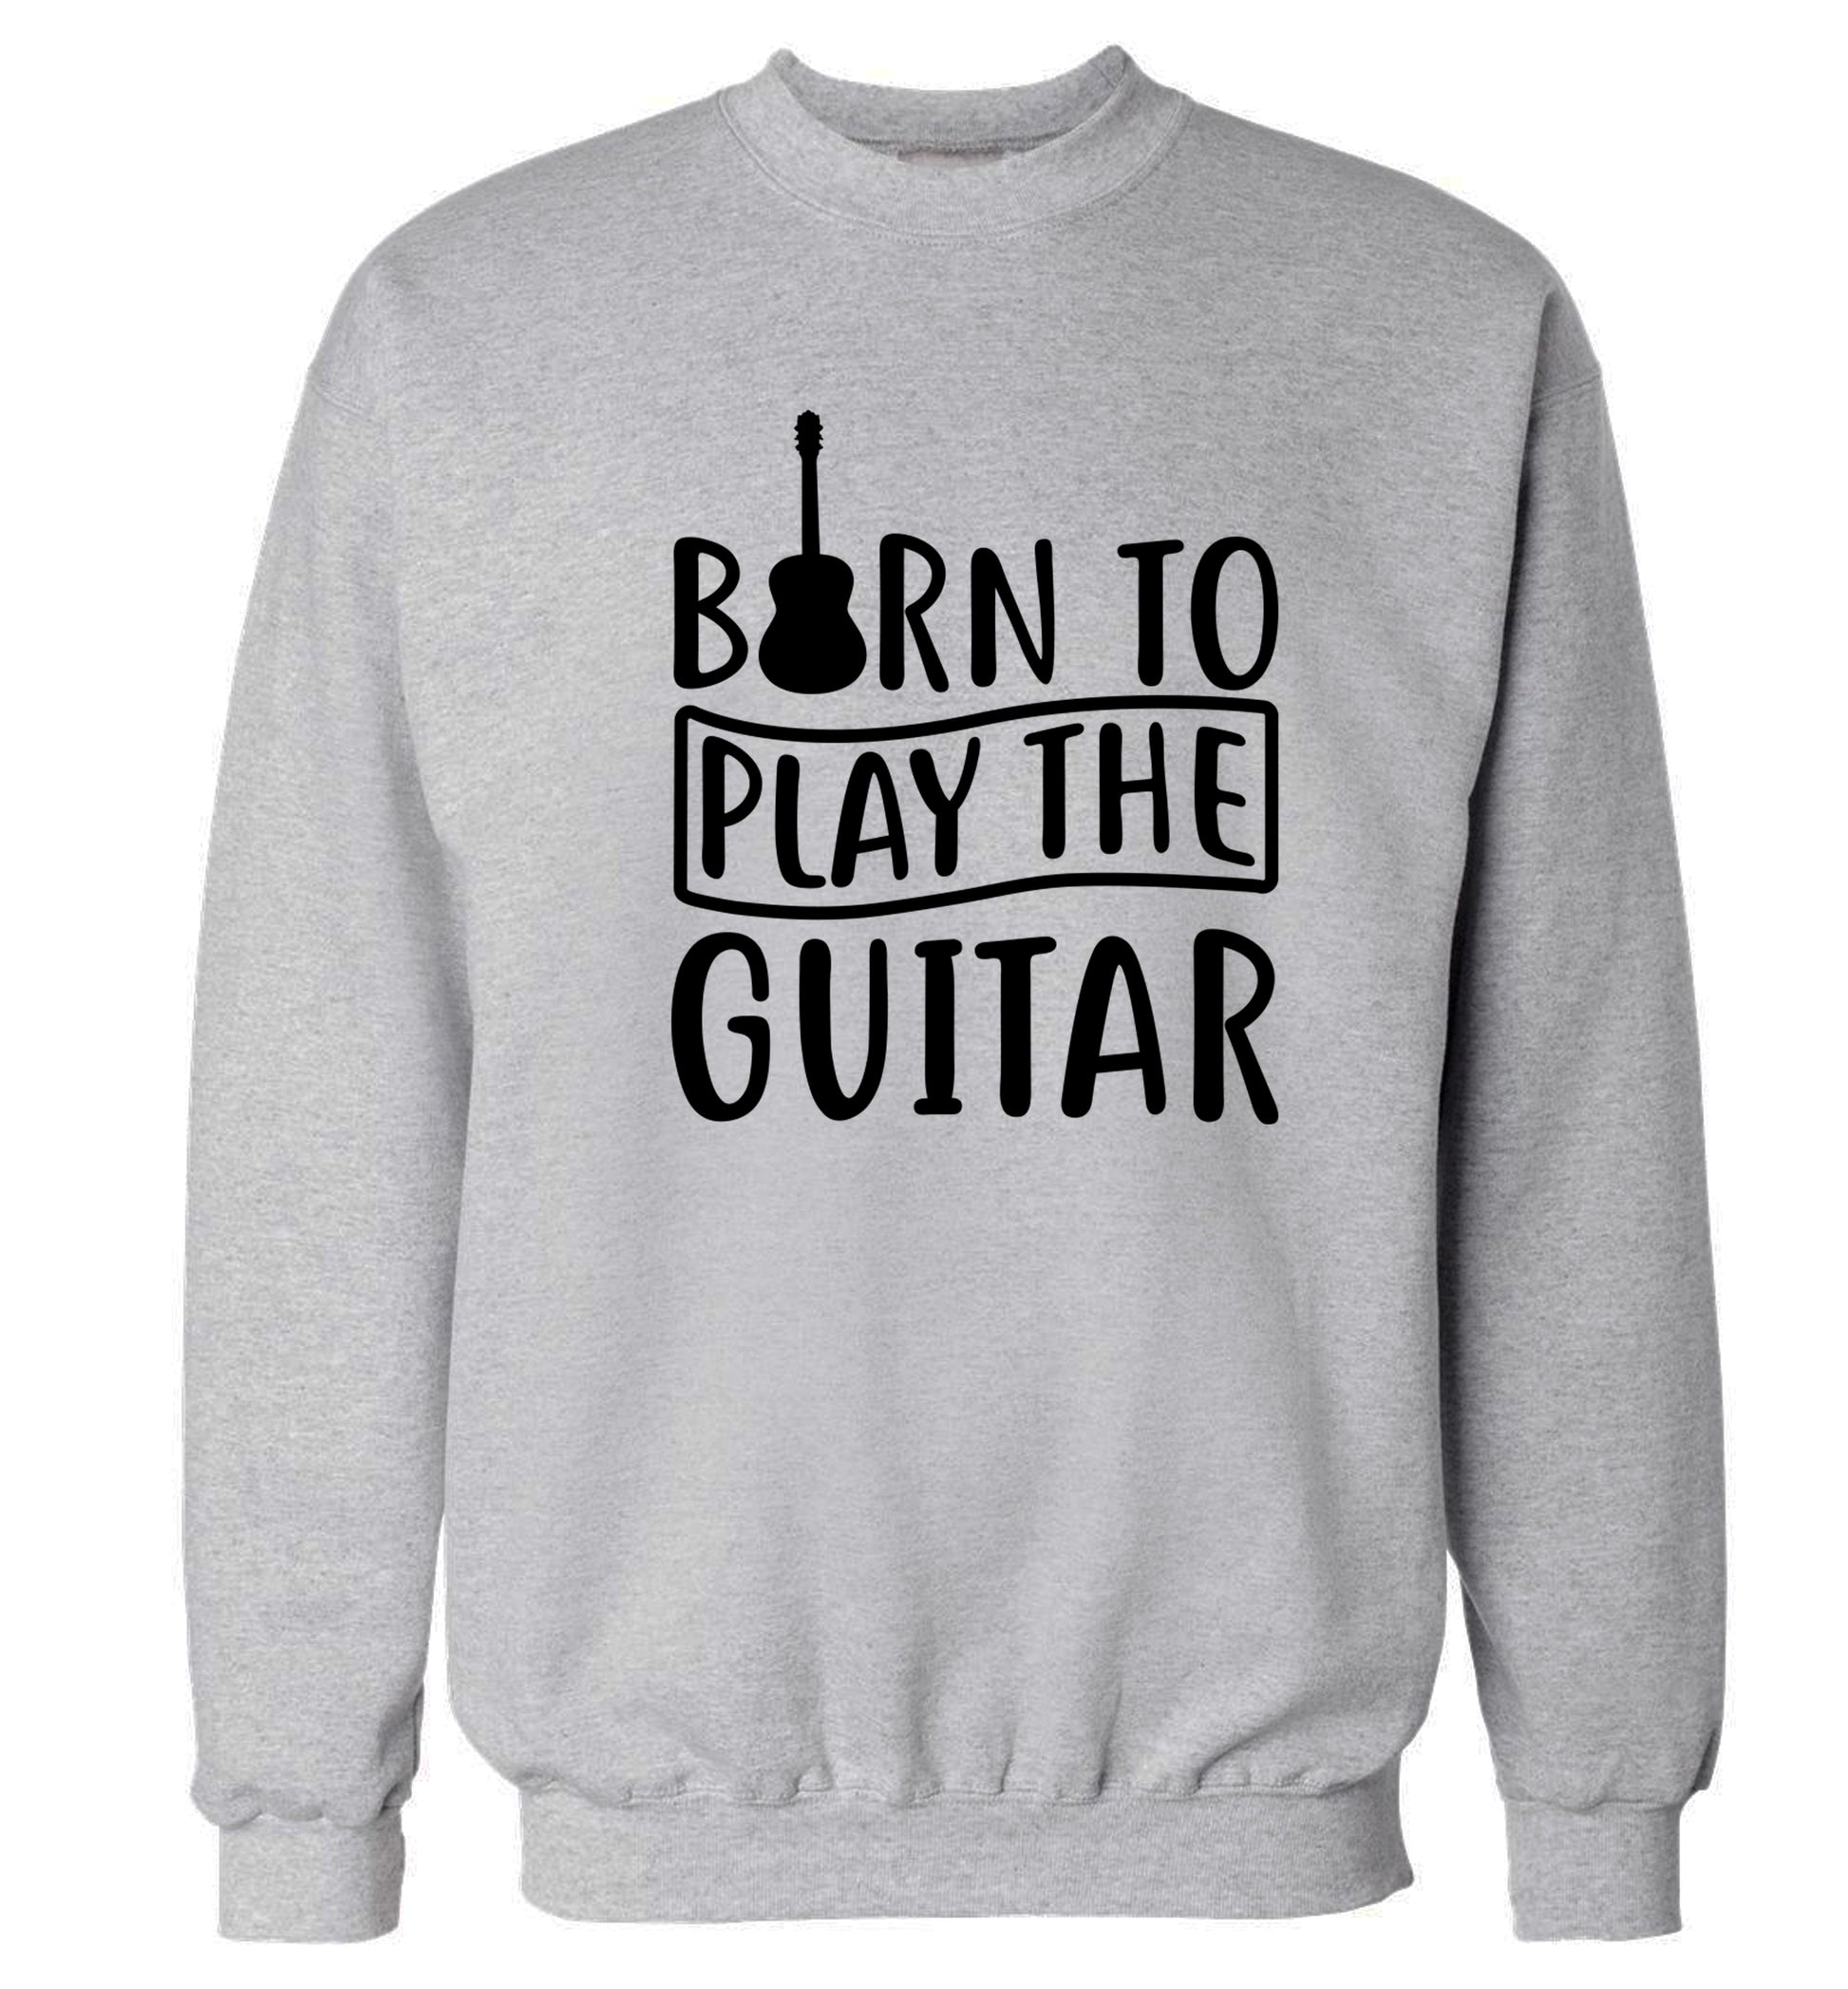 Born to play the guitar Adult's unisex grey Sweater 2XL